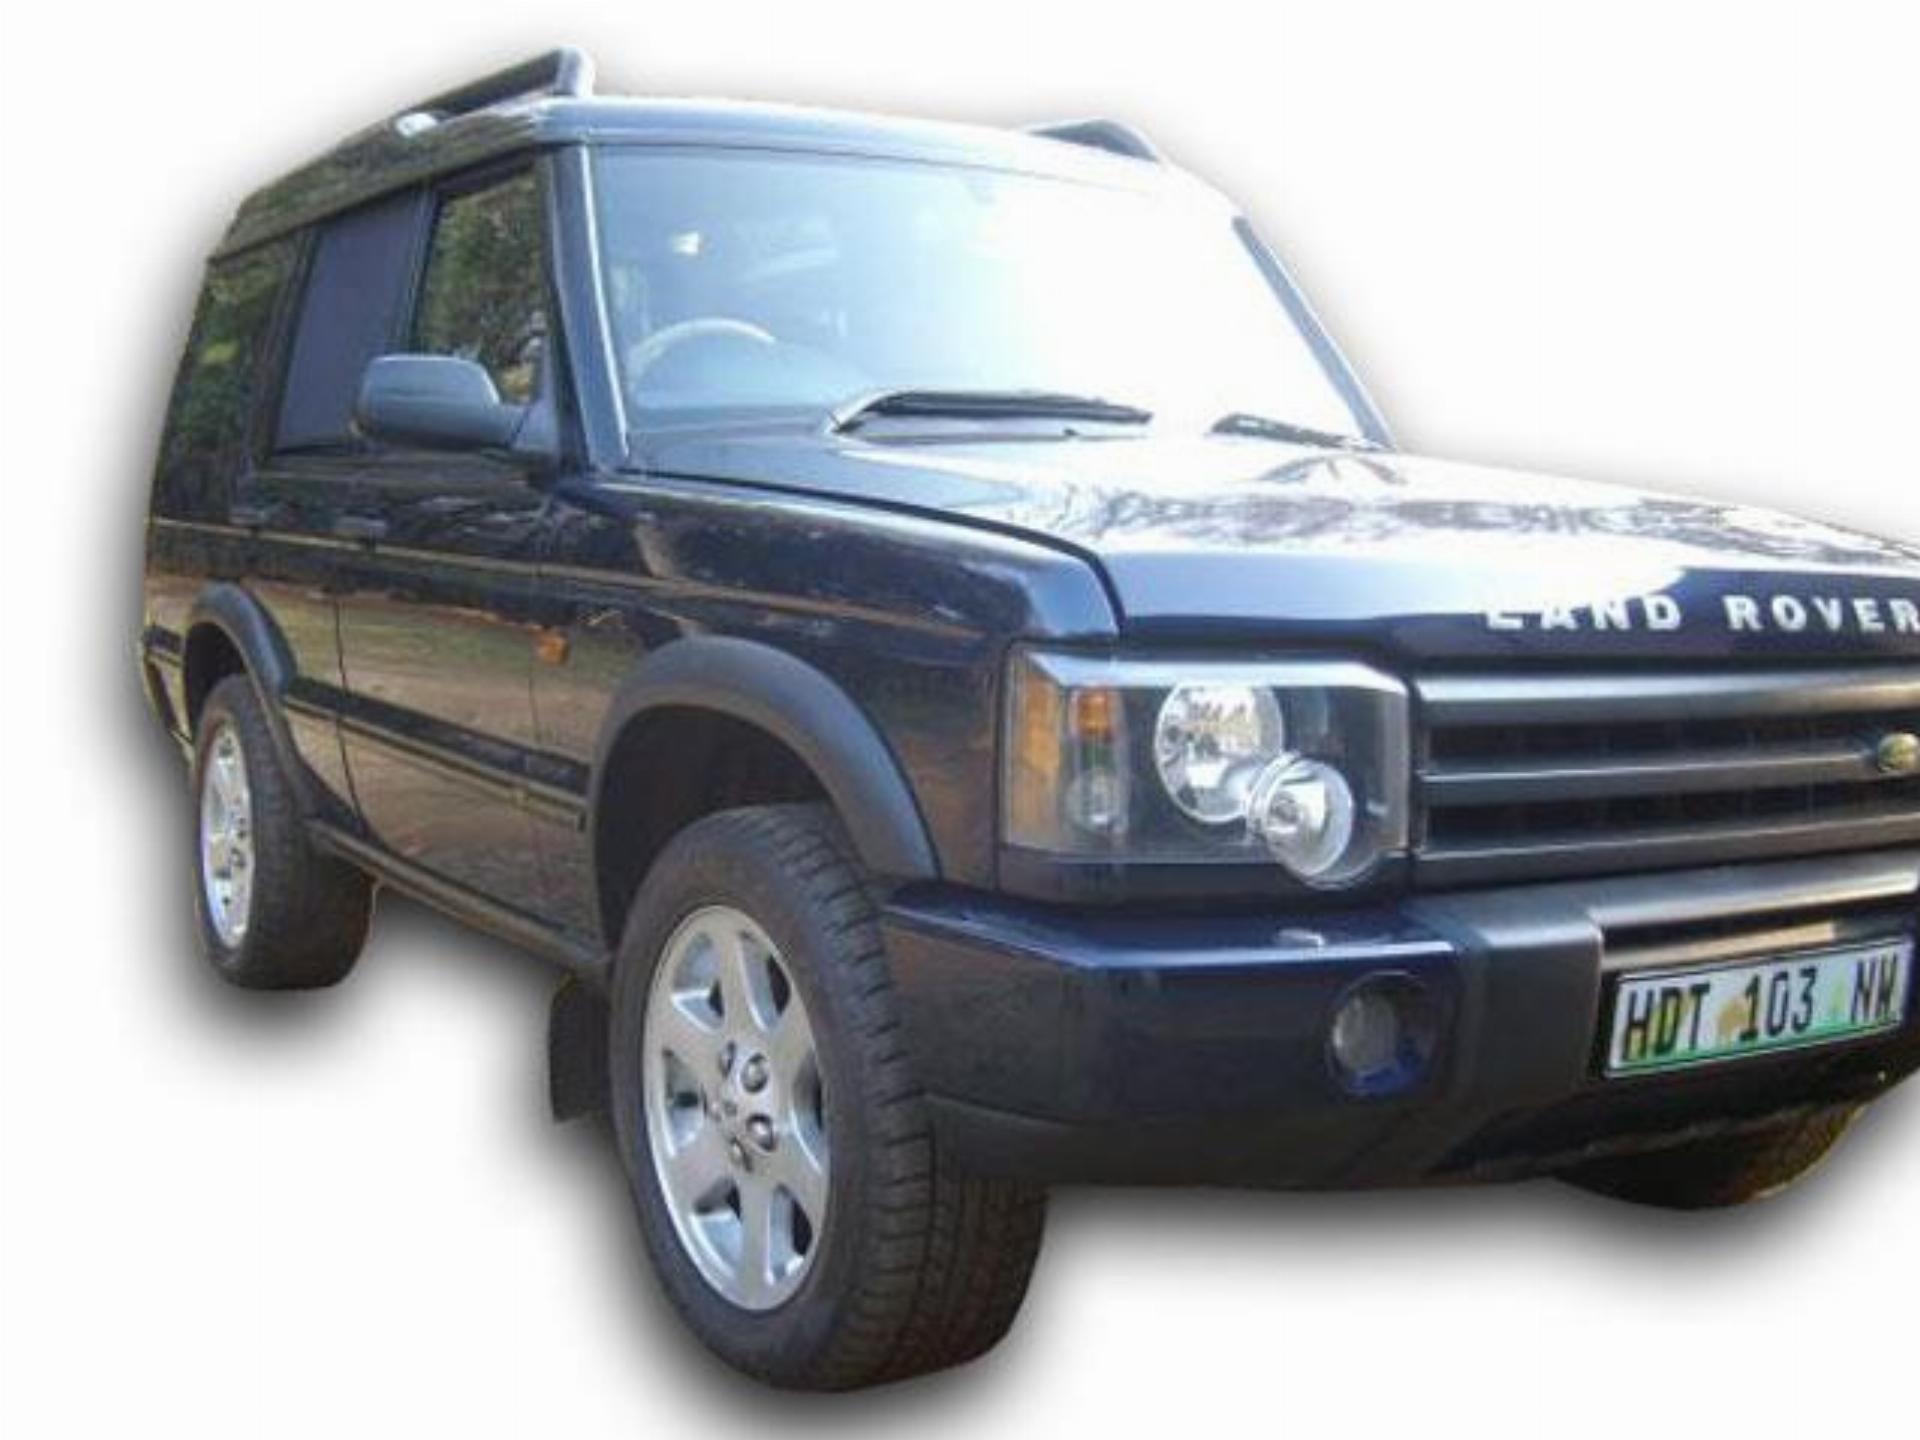 Used Land Rover Discovery 2 V8 ES Auto 2003 on auction